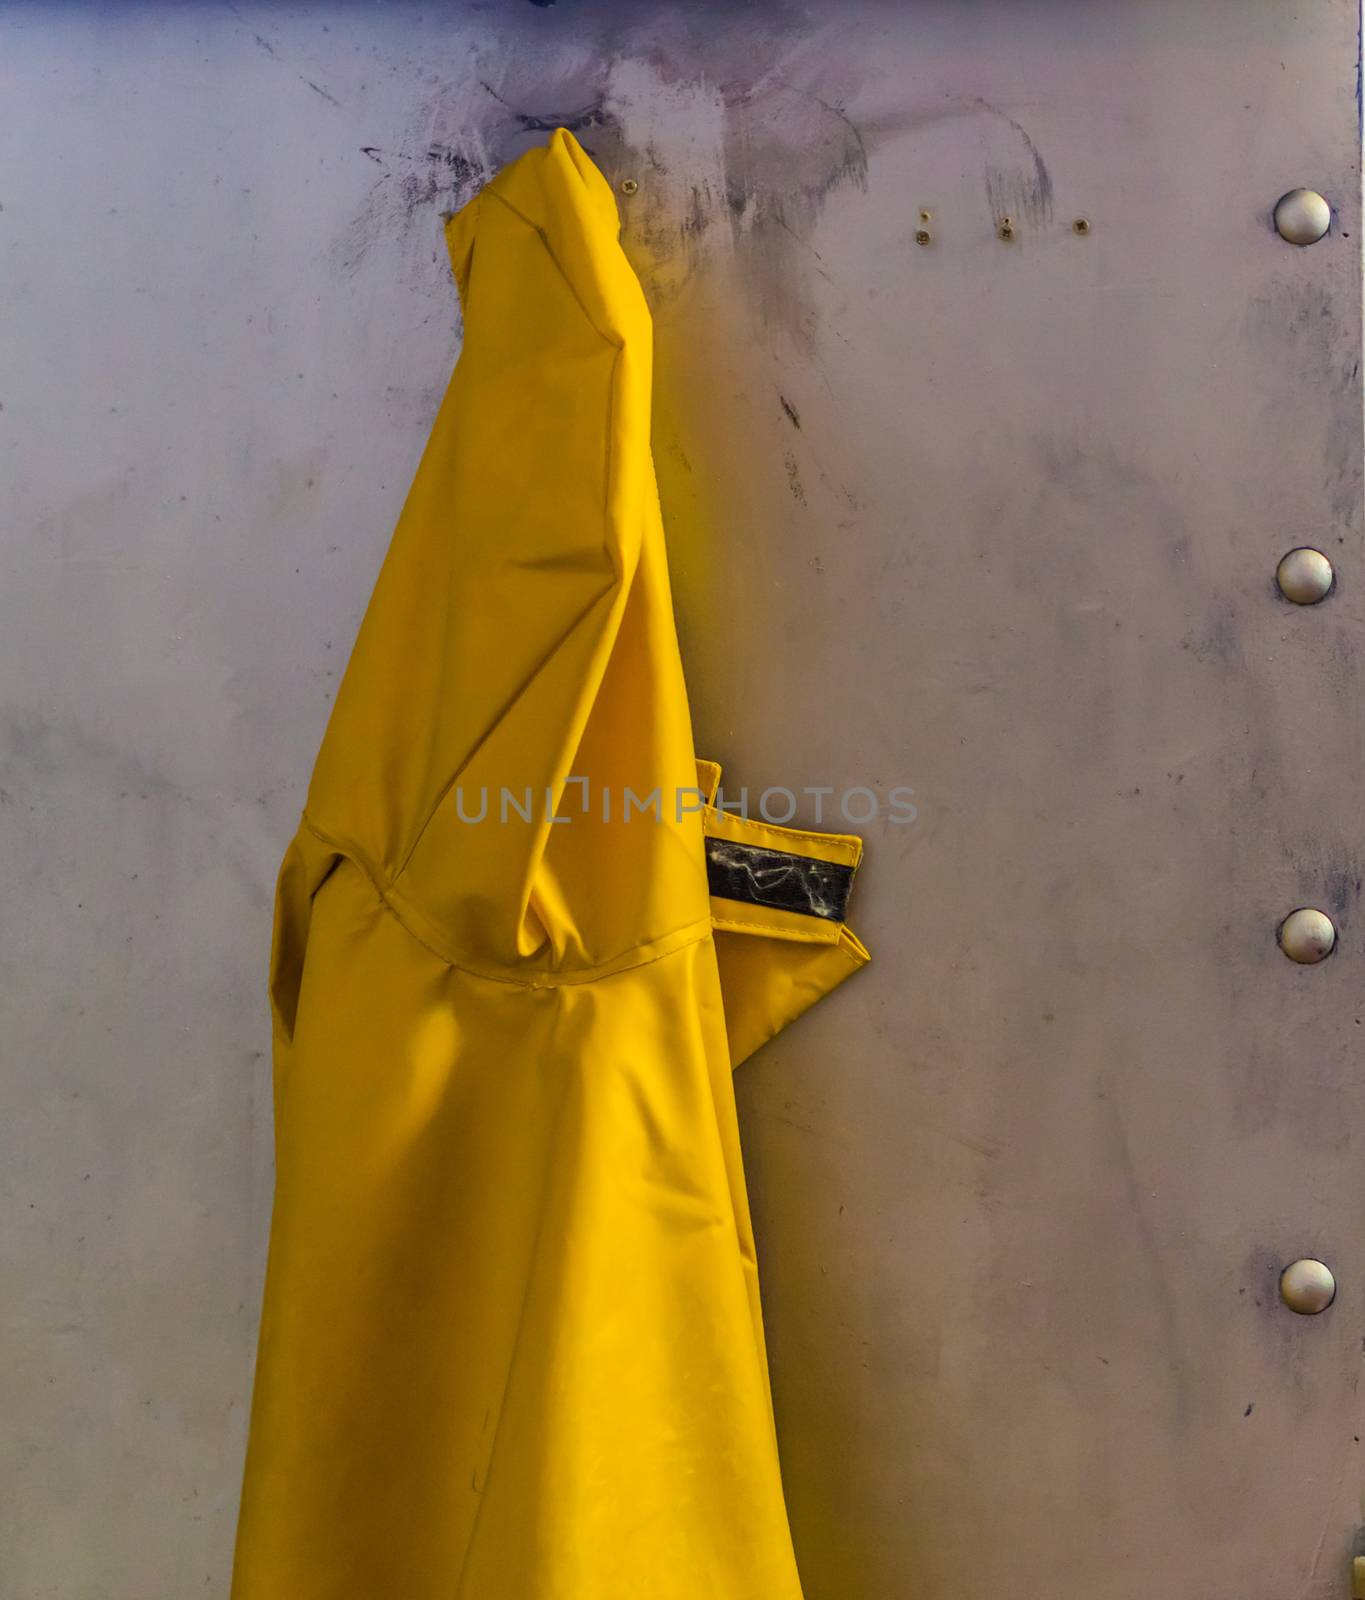 yellow raincoat hanging on a metal wall, Marine background, protective clothing for rainy days by charlottebleijenberg